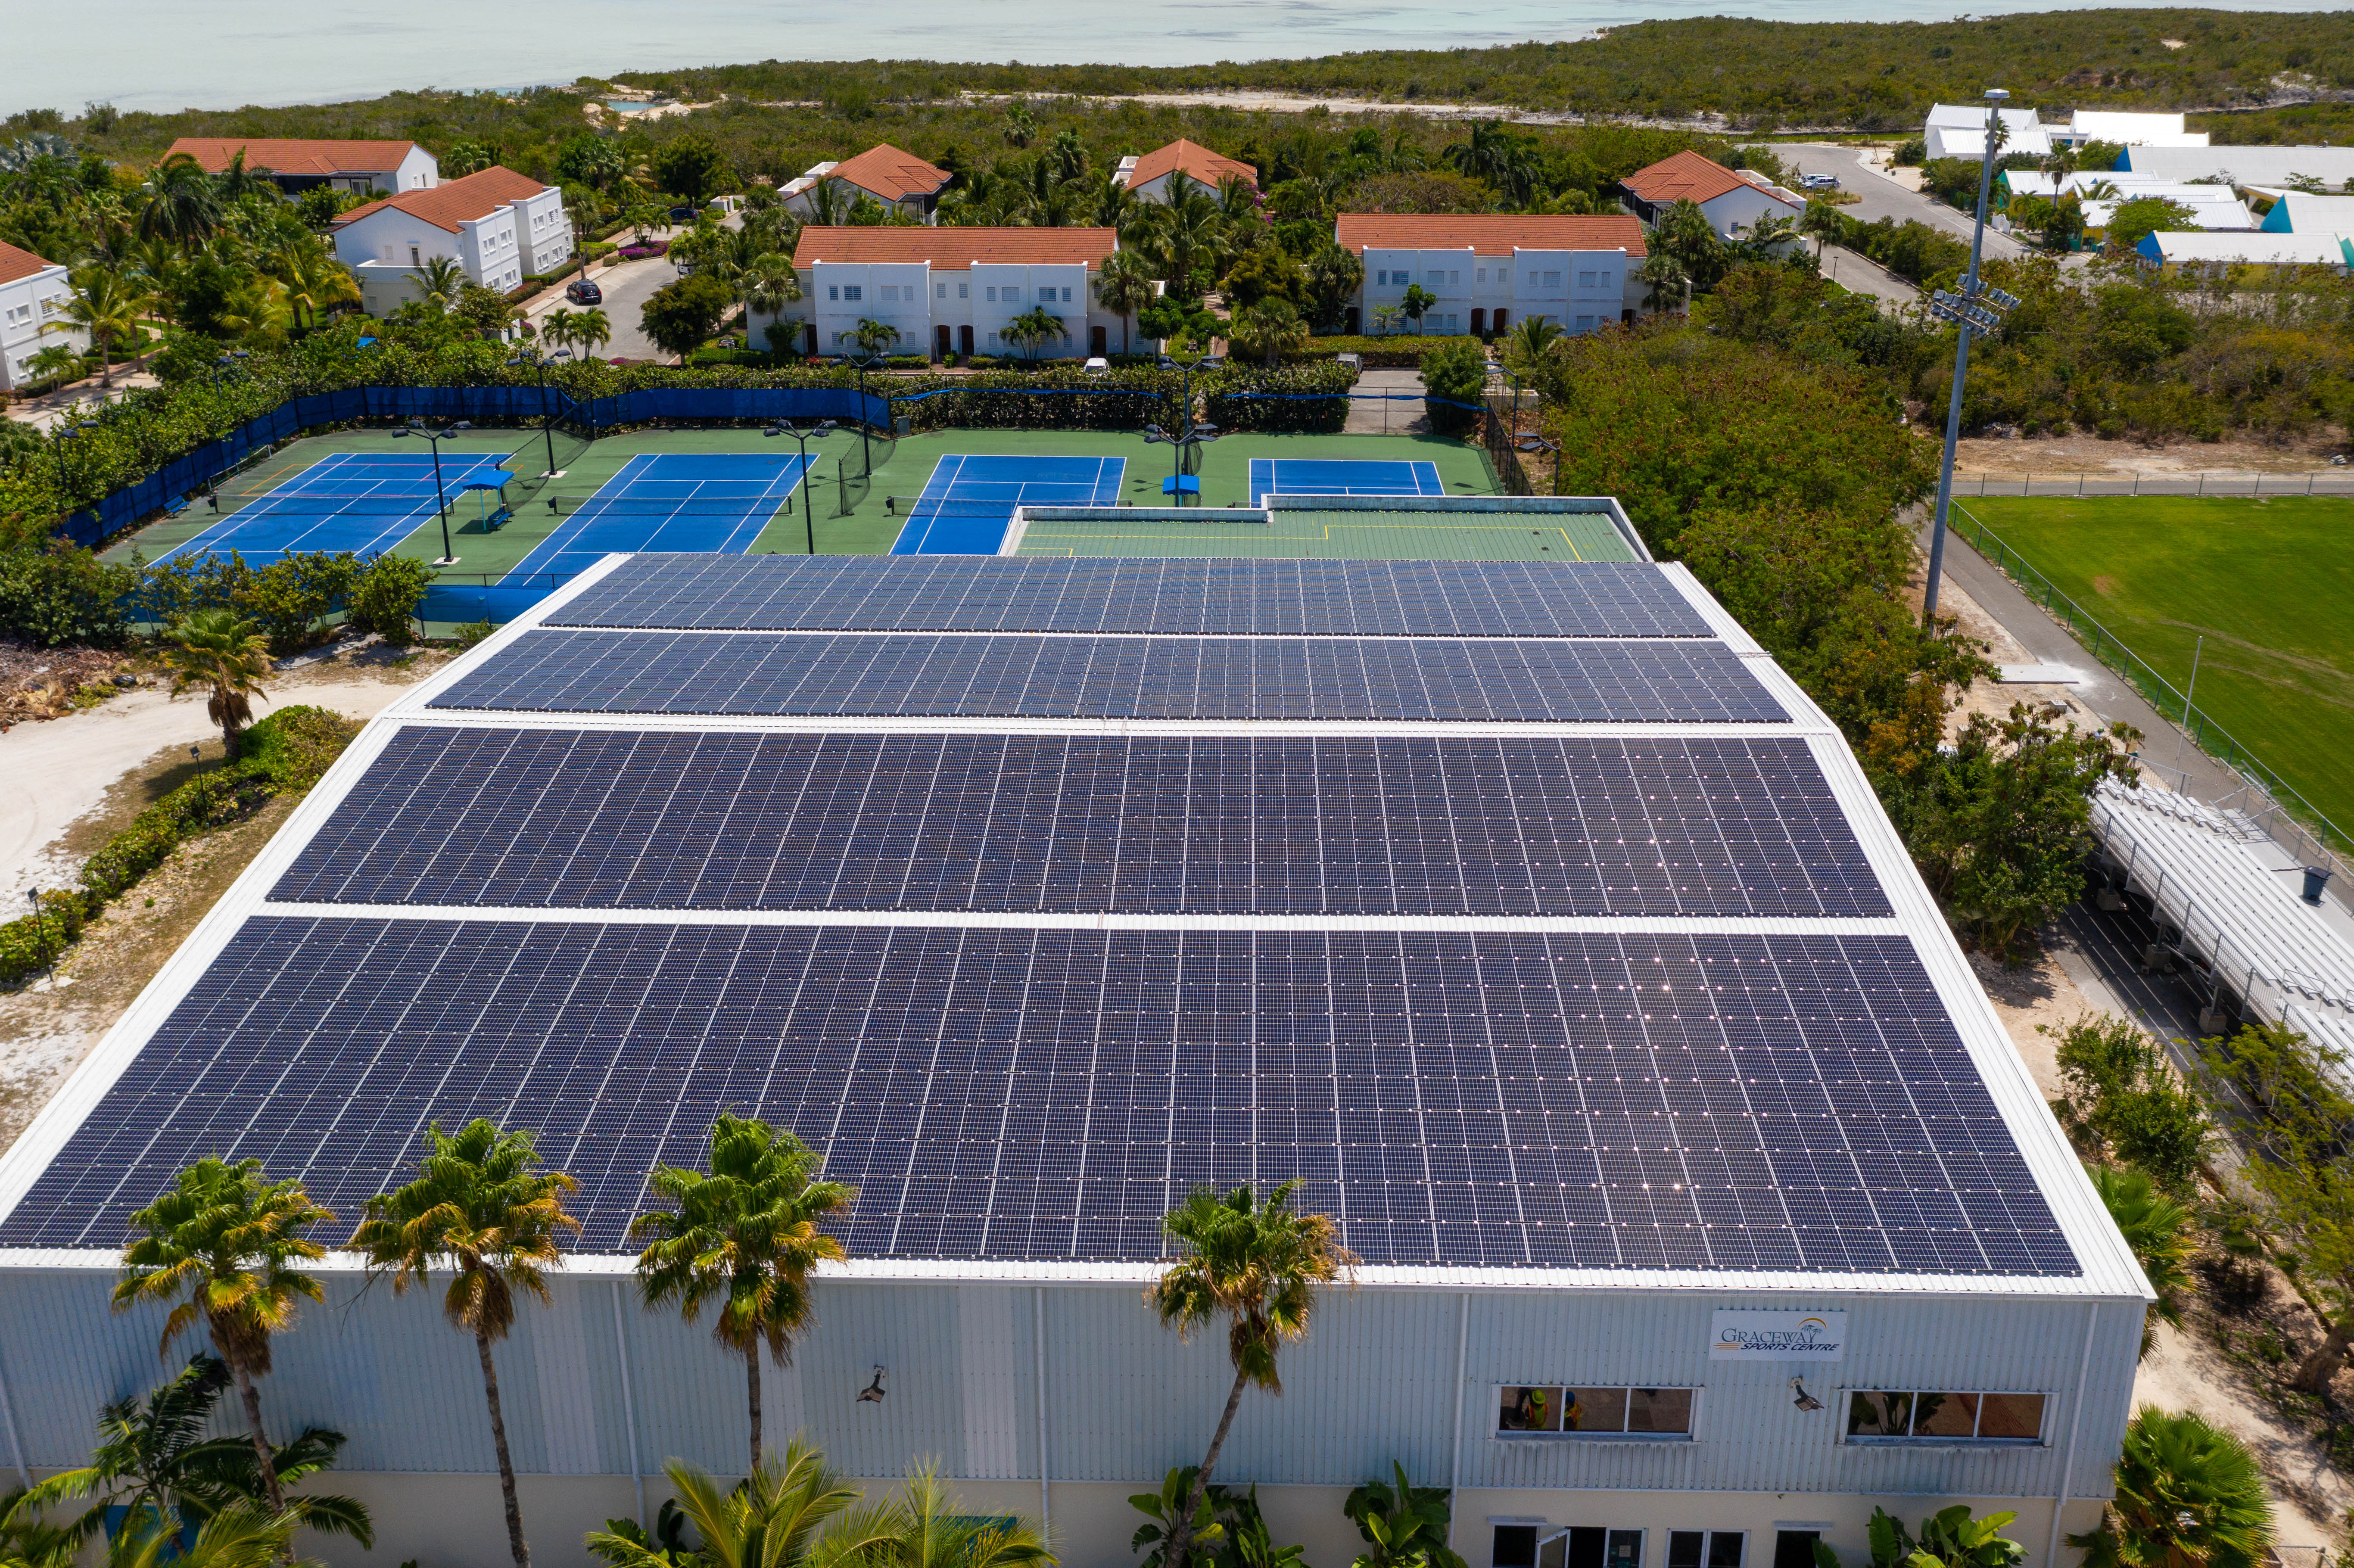 FortisTCI Adds More Solar with Partners Graceway Sports Centre and H2O Lifestyle Resort